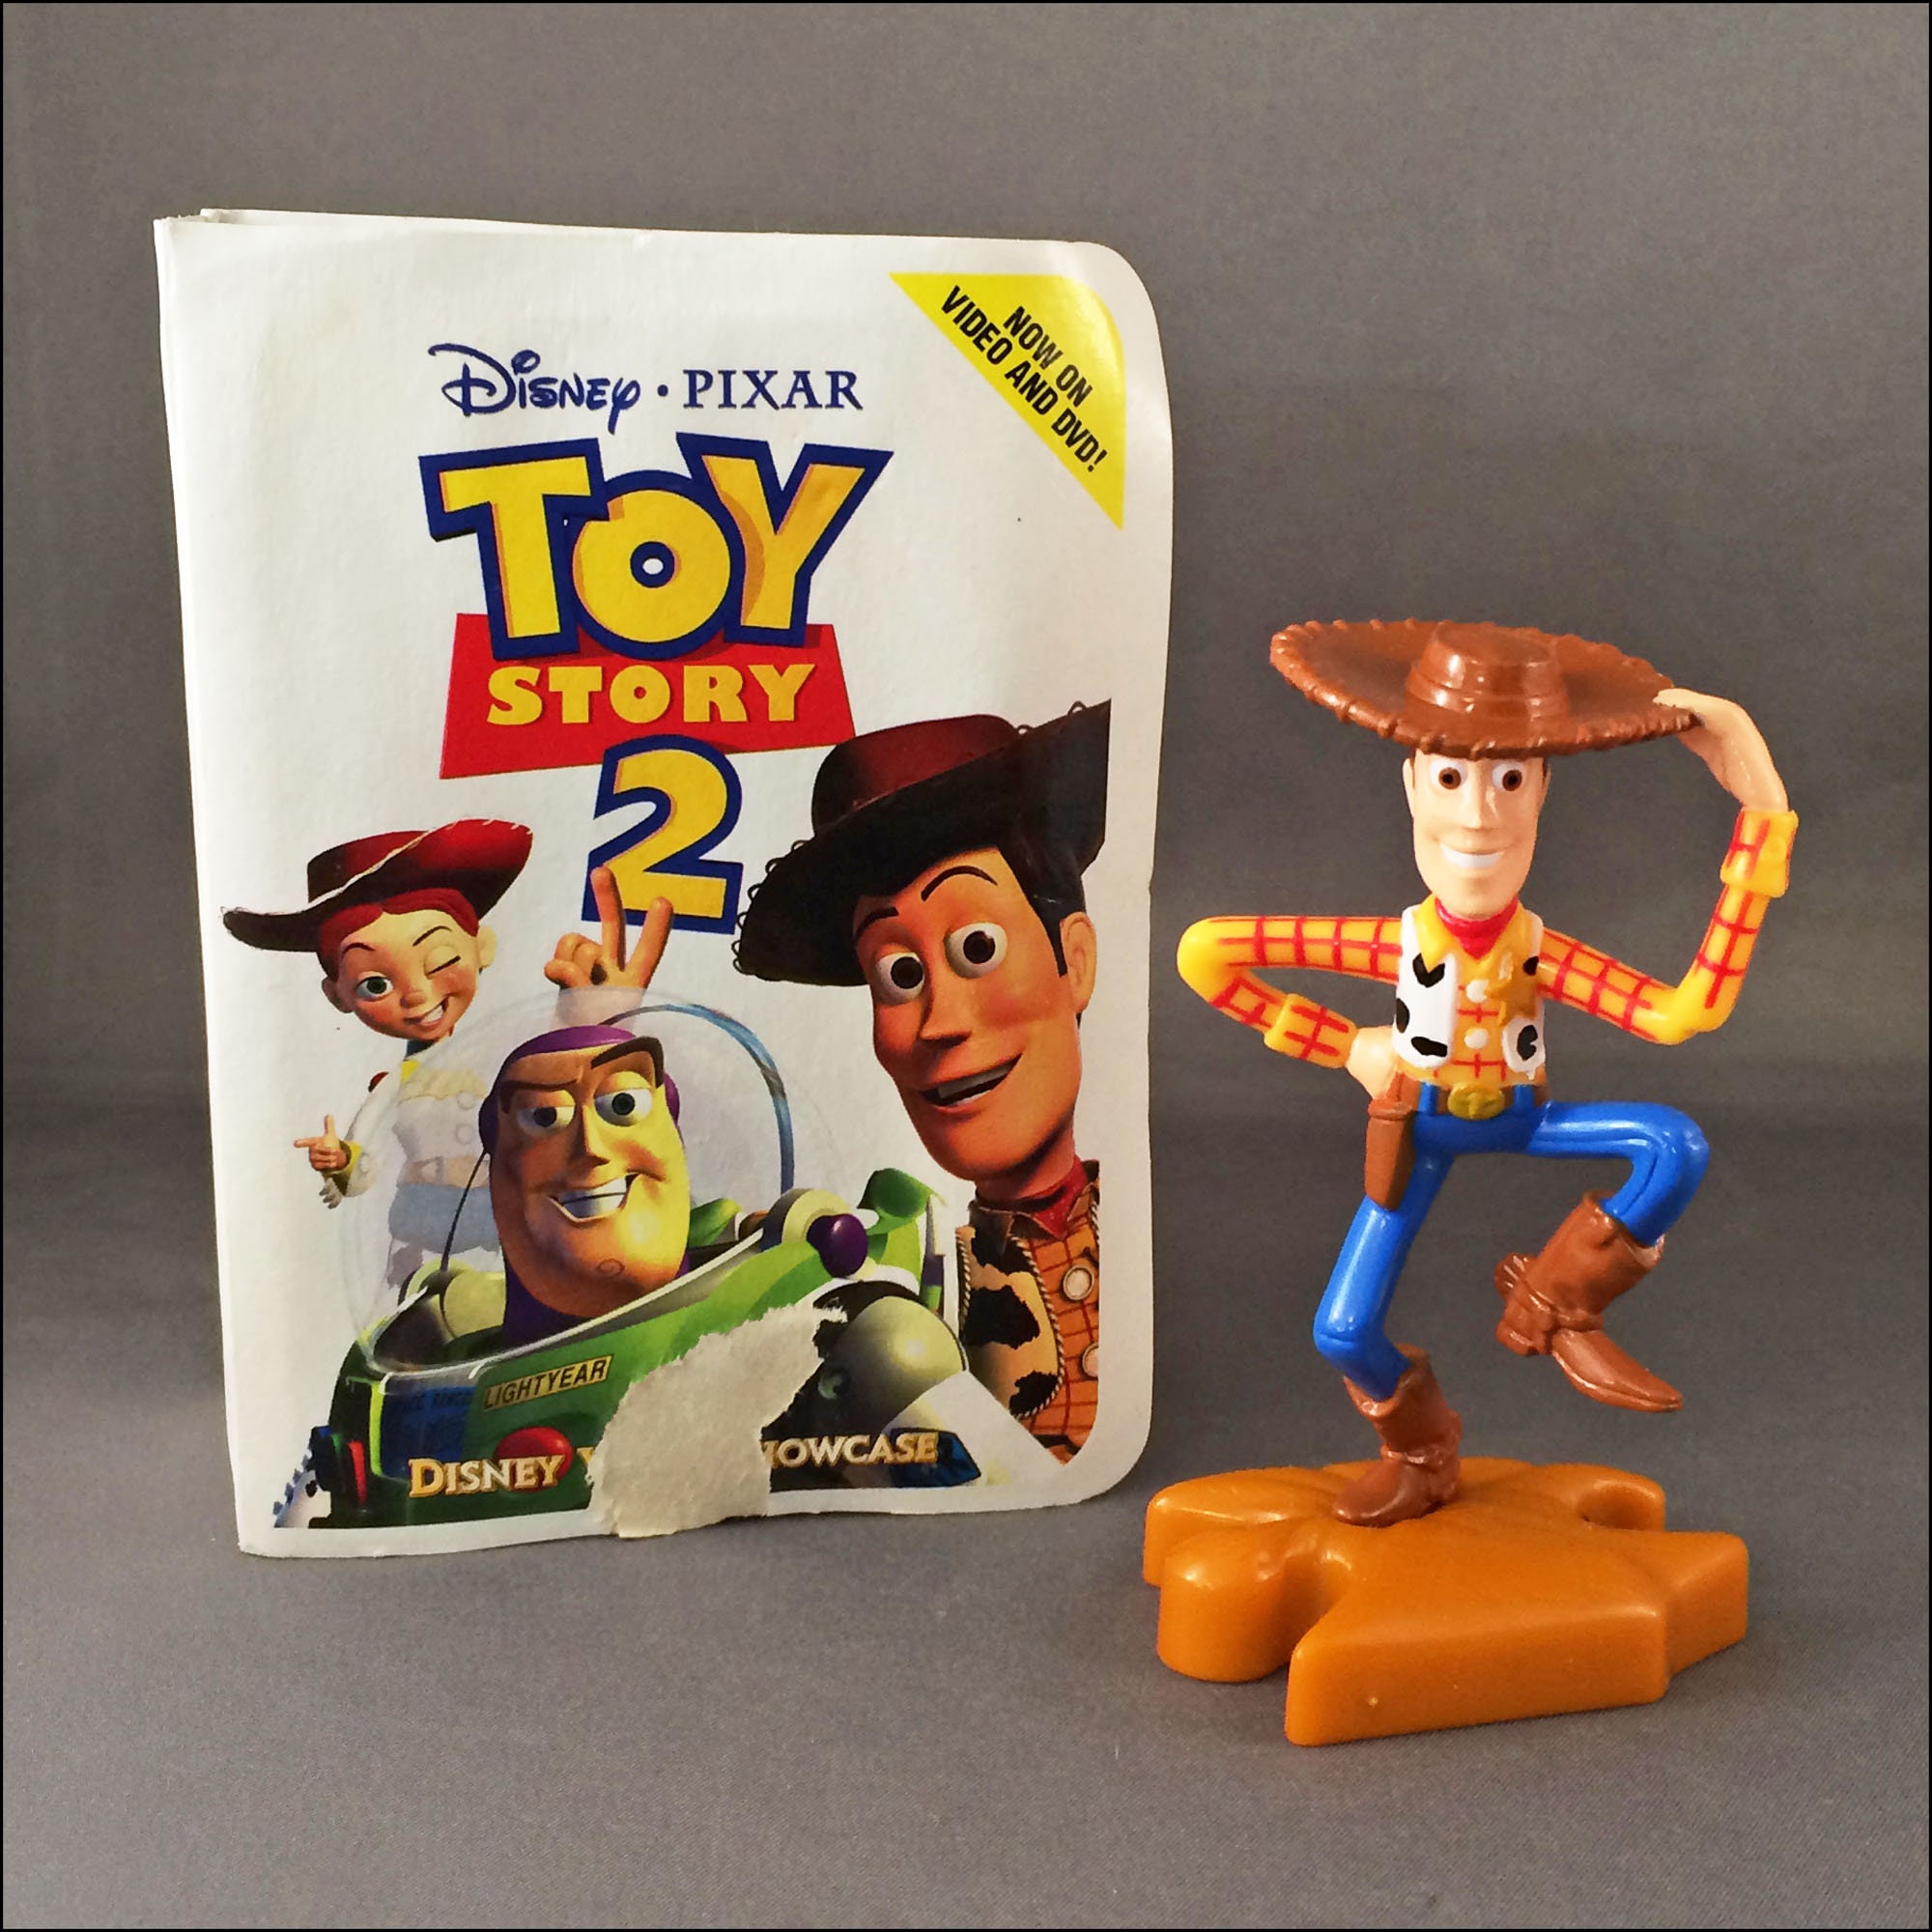 Details about   DISNEY TOY STORY Cowboy Woody Figurine 90s McDonalds Toy Gift Cake Topper NEW 